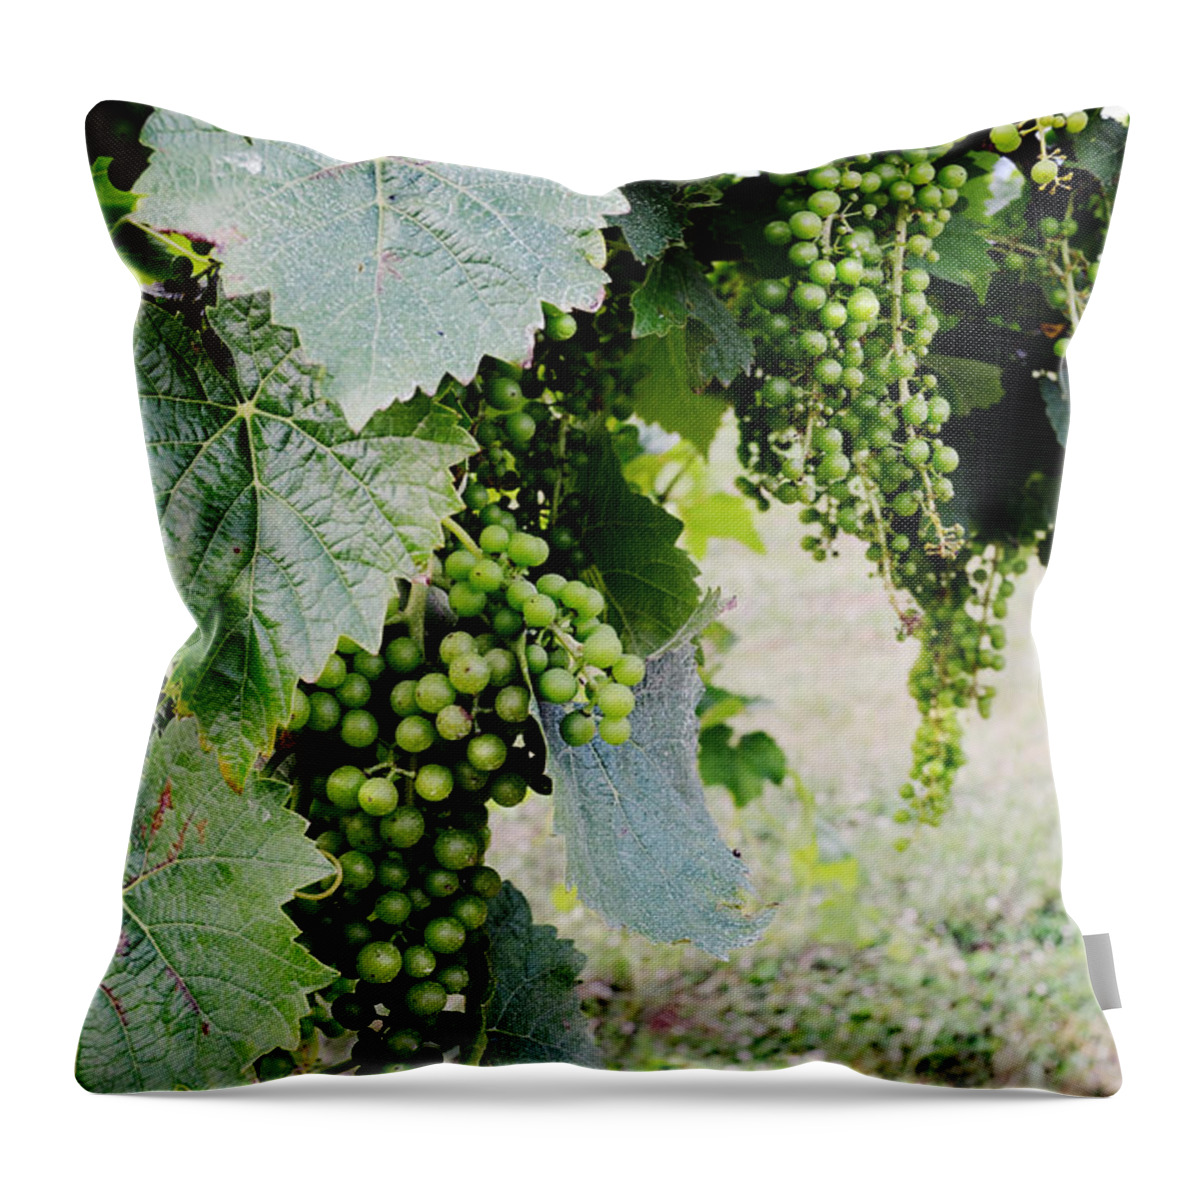 Grapes Throw Pillow featuring the photograph Before the Harvest by La Dolce Vita